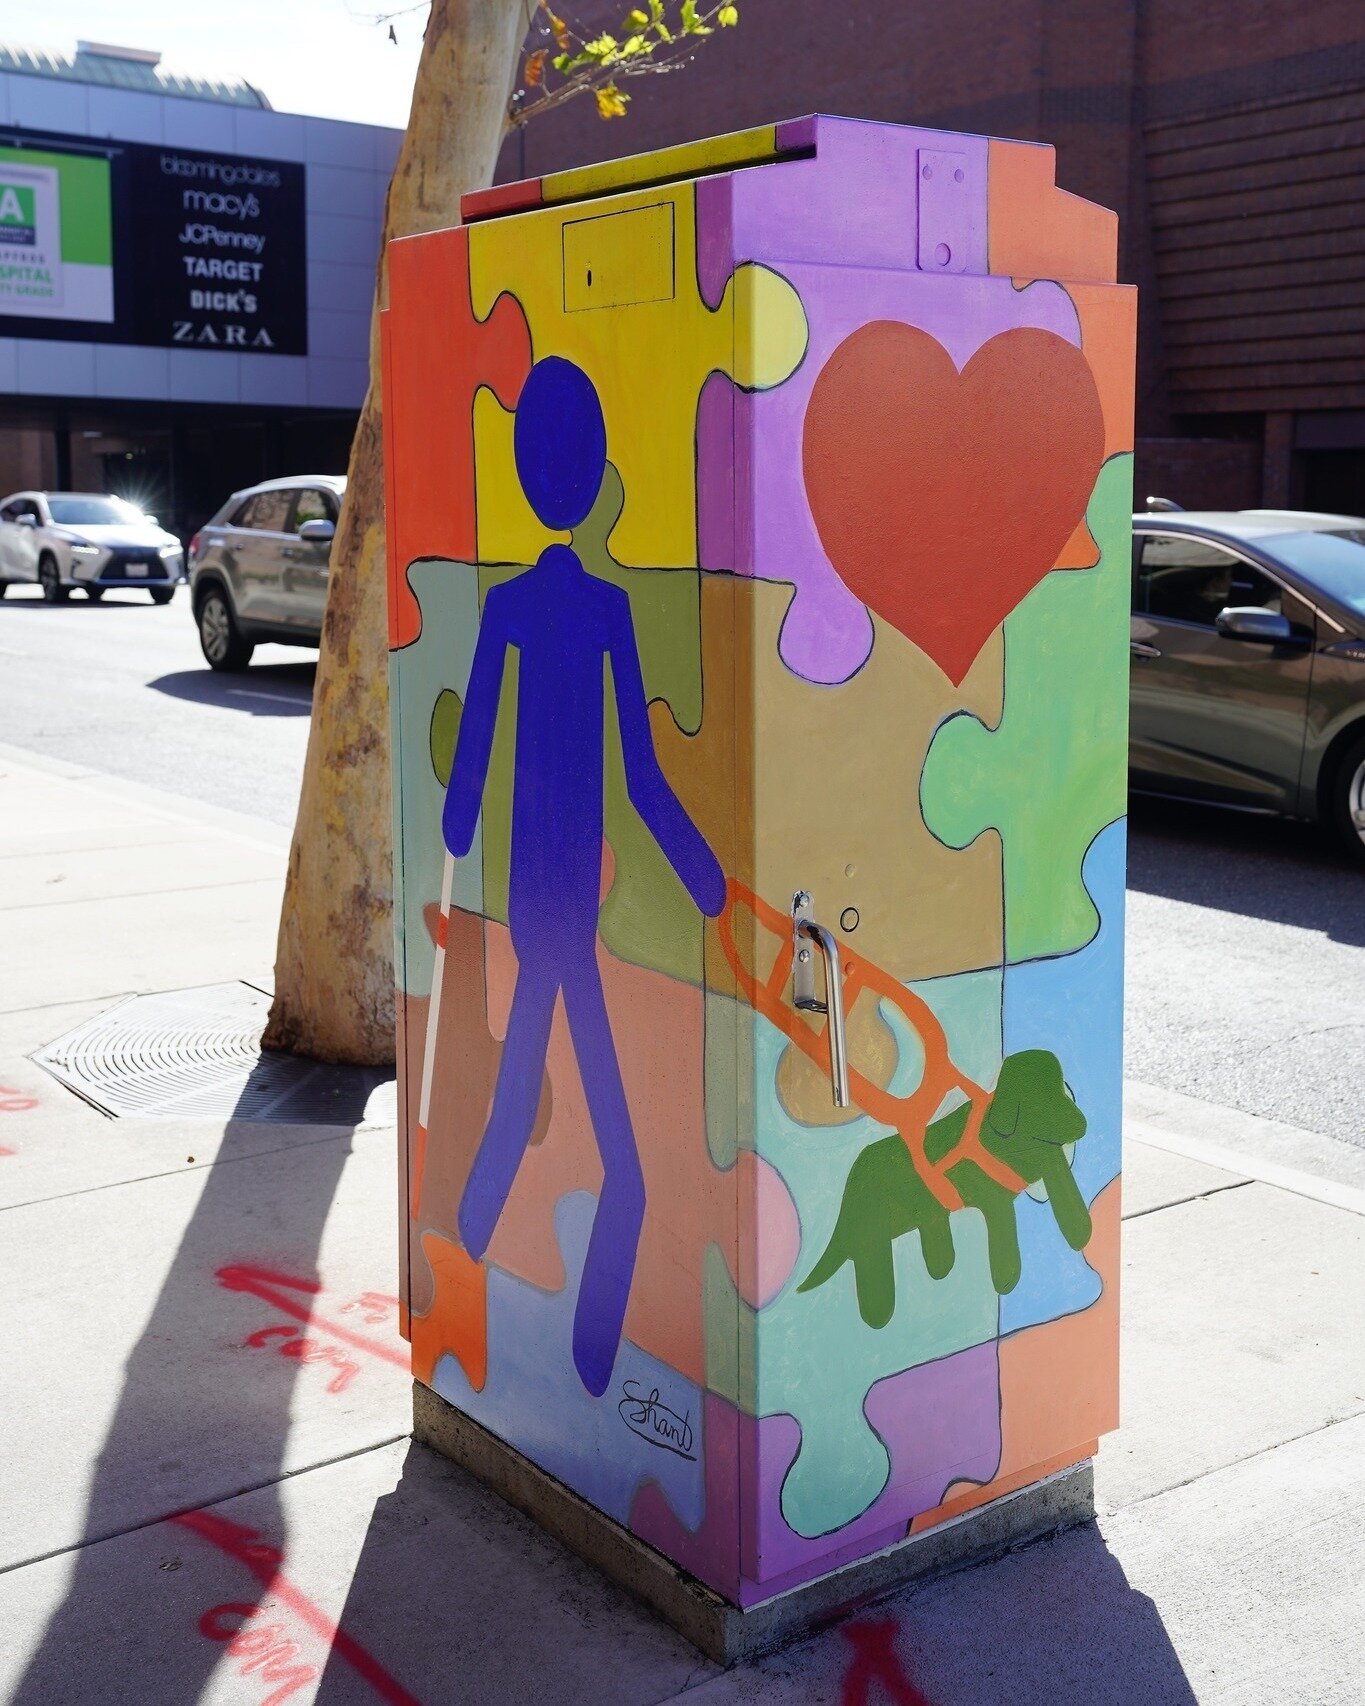 Follow us for a biking tour of the 5 new Beyond the Box murals painted this year in Glendale! 🚲 Artists submitted proposals inspired by this year&rsquo;s theme of &lsquo;Celebrating People with Disabilities&rsquo; to promote a positive representatio